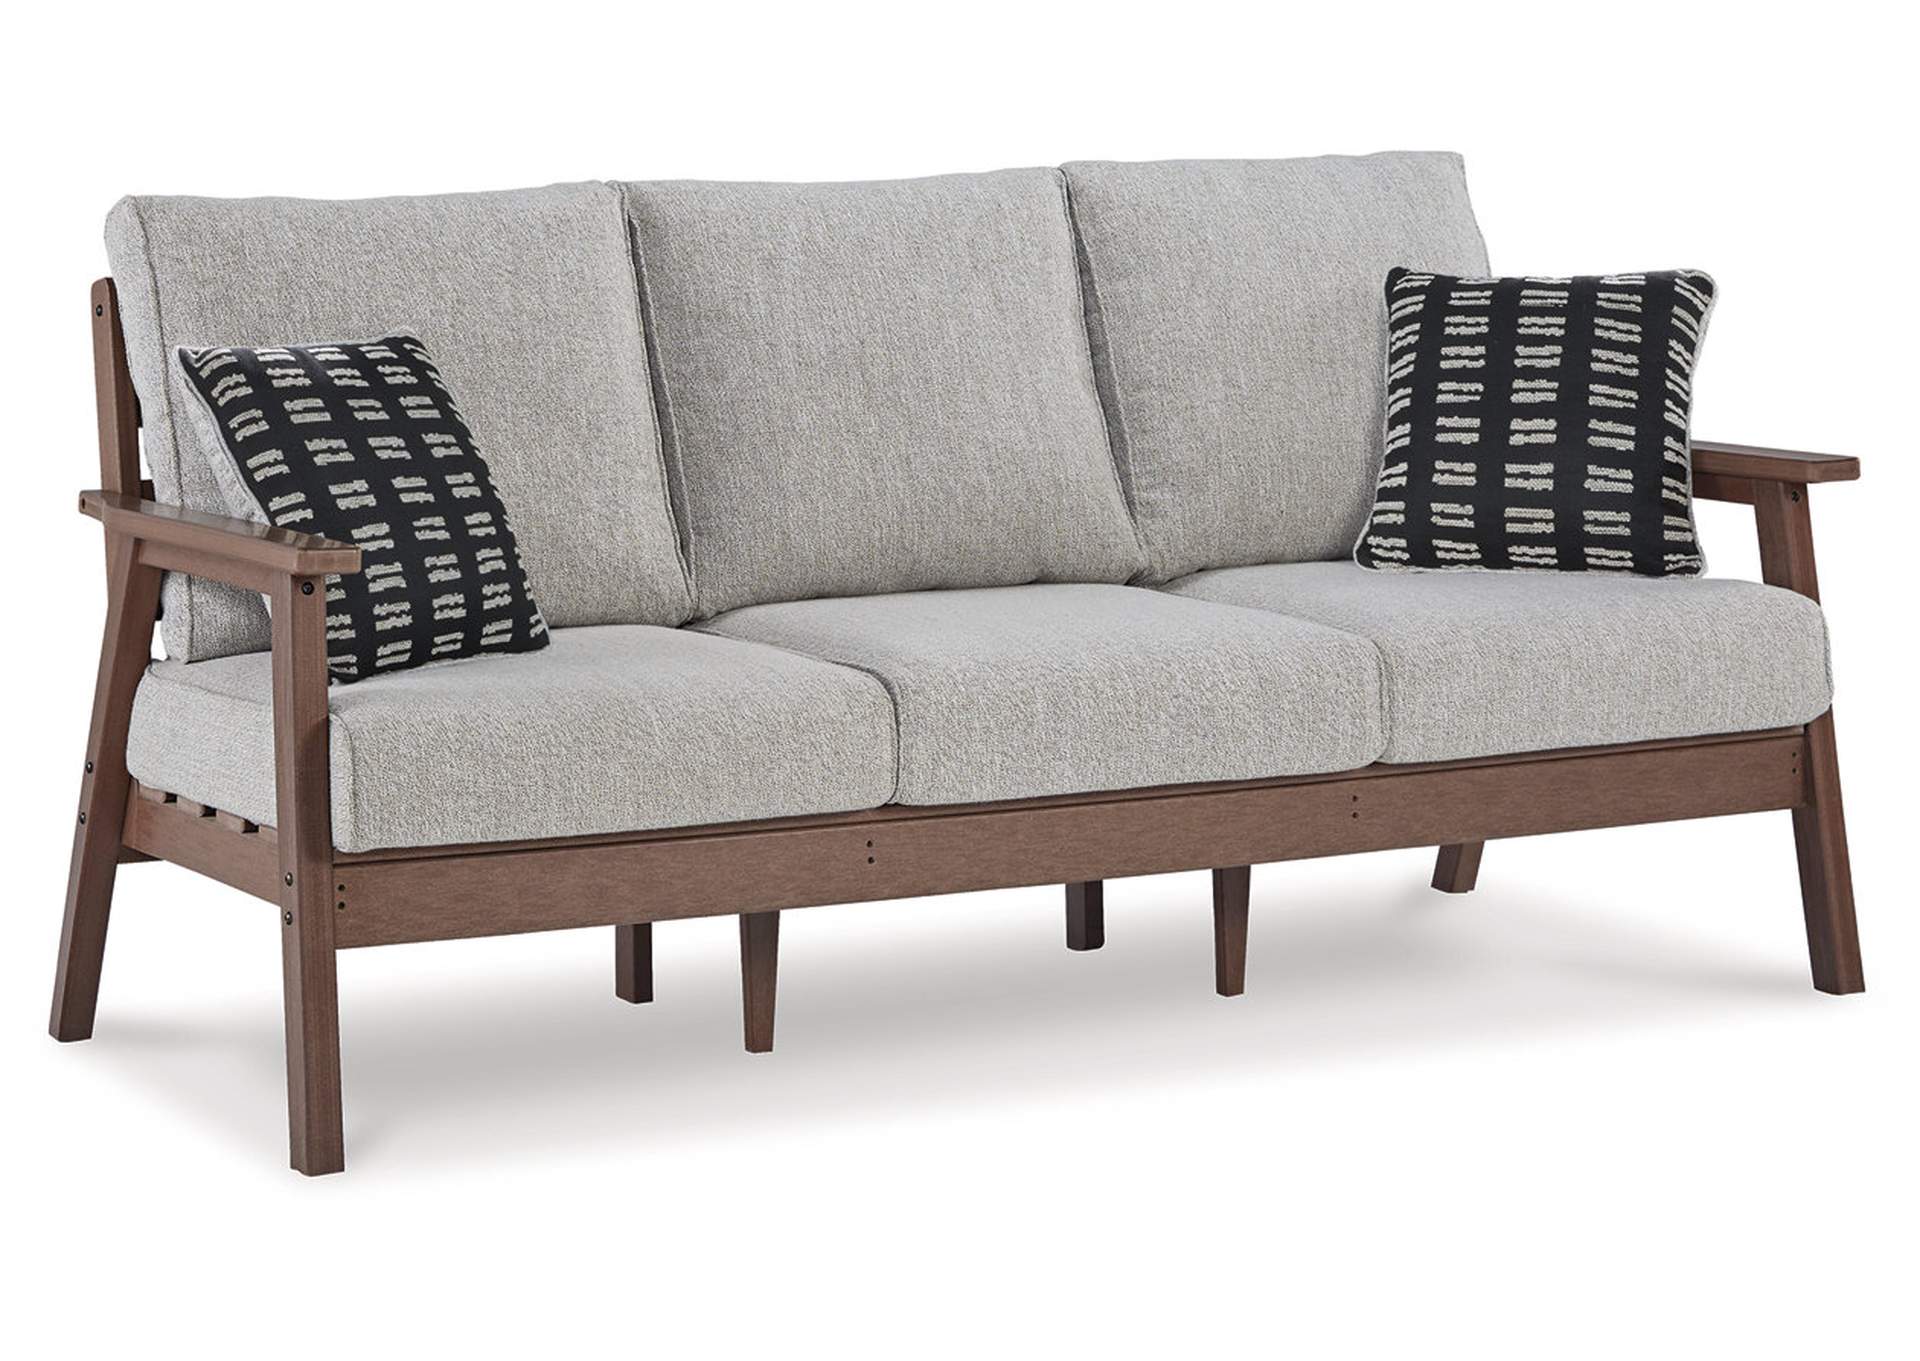 Emmeline Outdoor Sofa with Coffee Table,Outdoor By Ashley